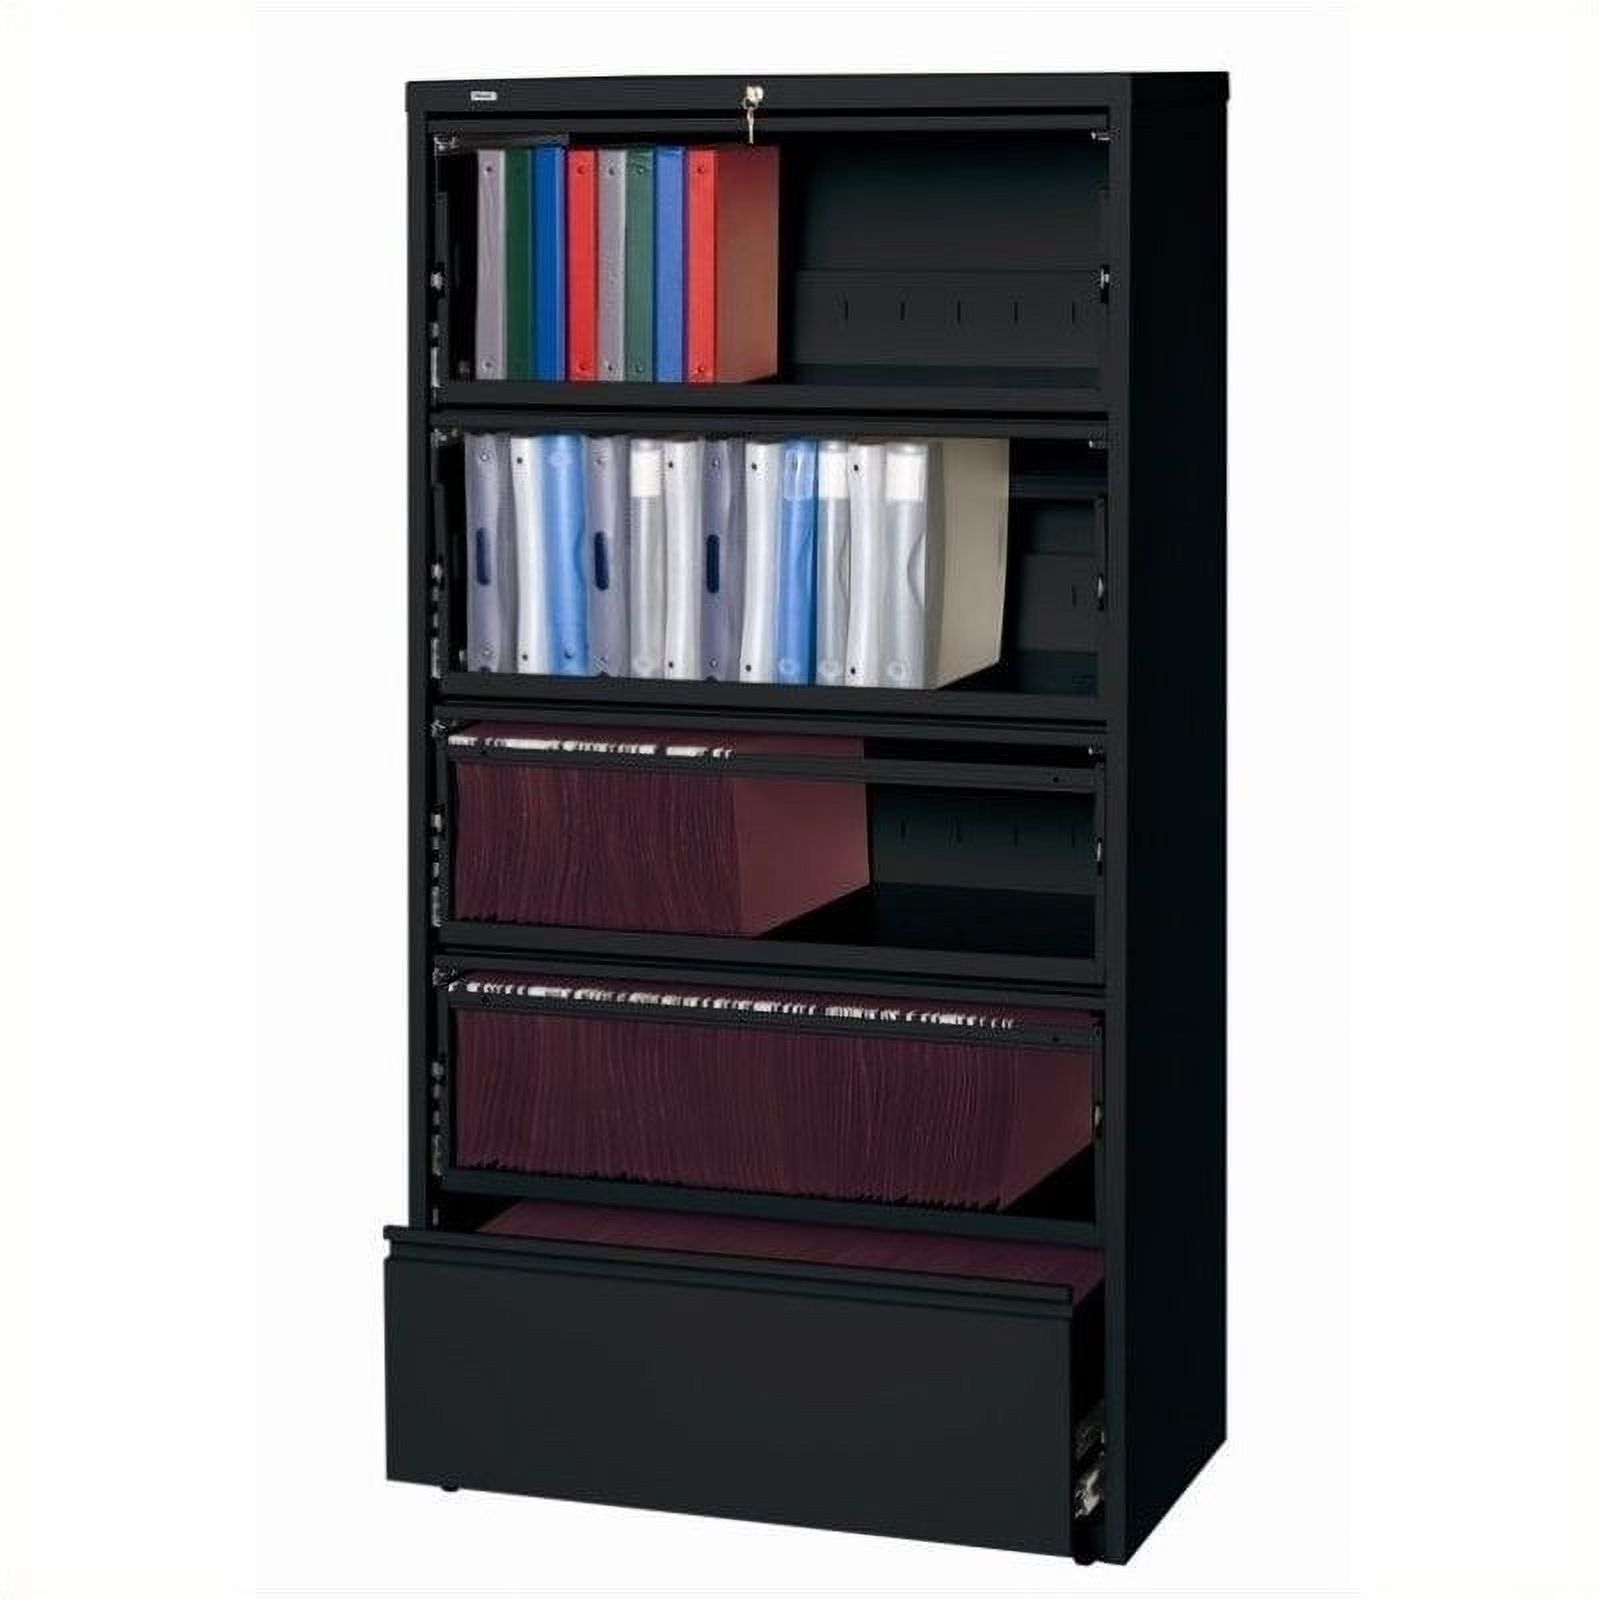 Scranton & Co 36" 5-Drawer Contemporary Metal Lateral File Cabinet in Black - image 2 of 2